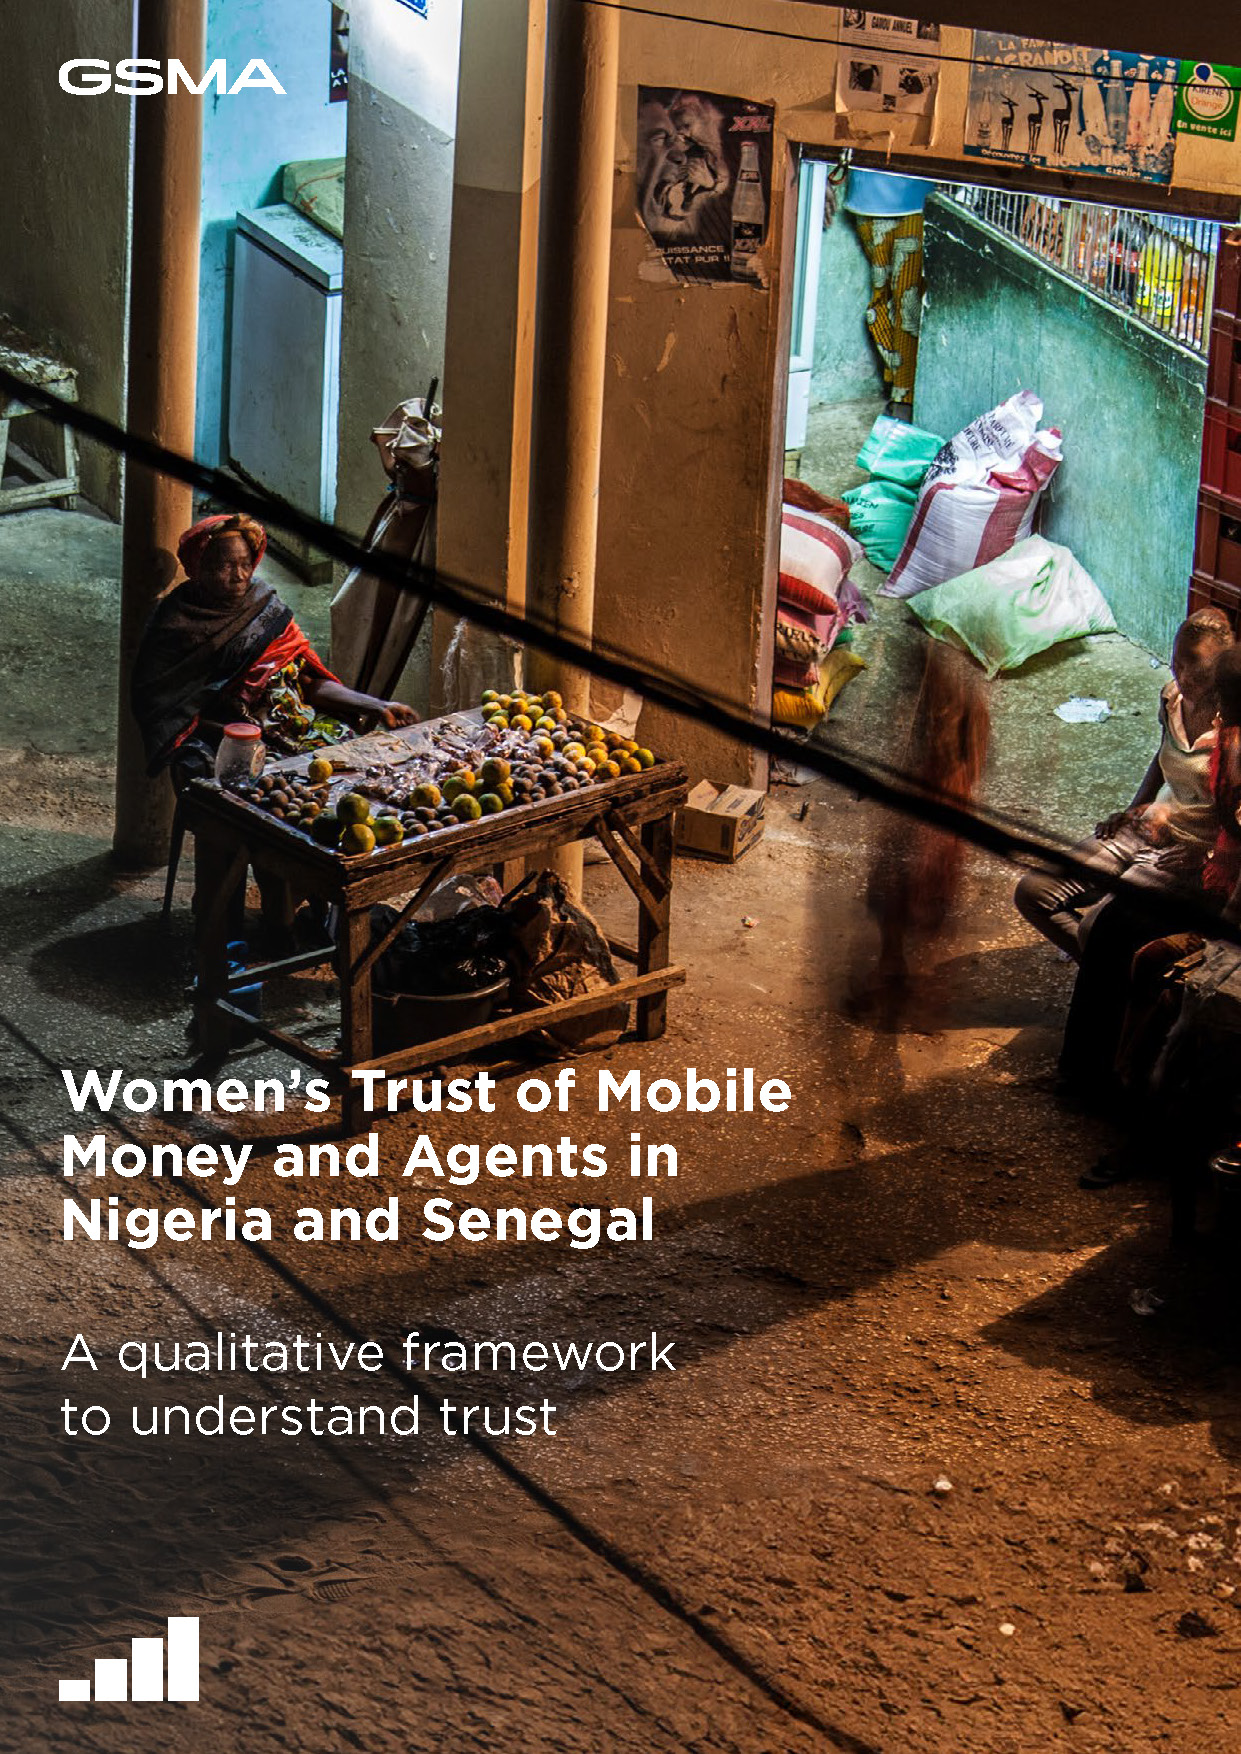 Women’s Trust of Mobile Money and Agents in Nigeria and Senegal image